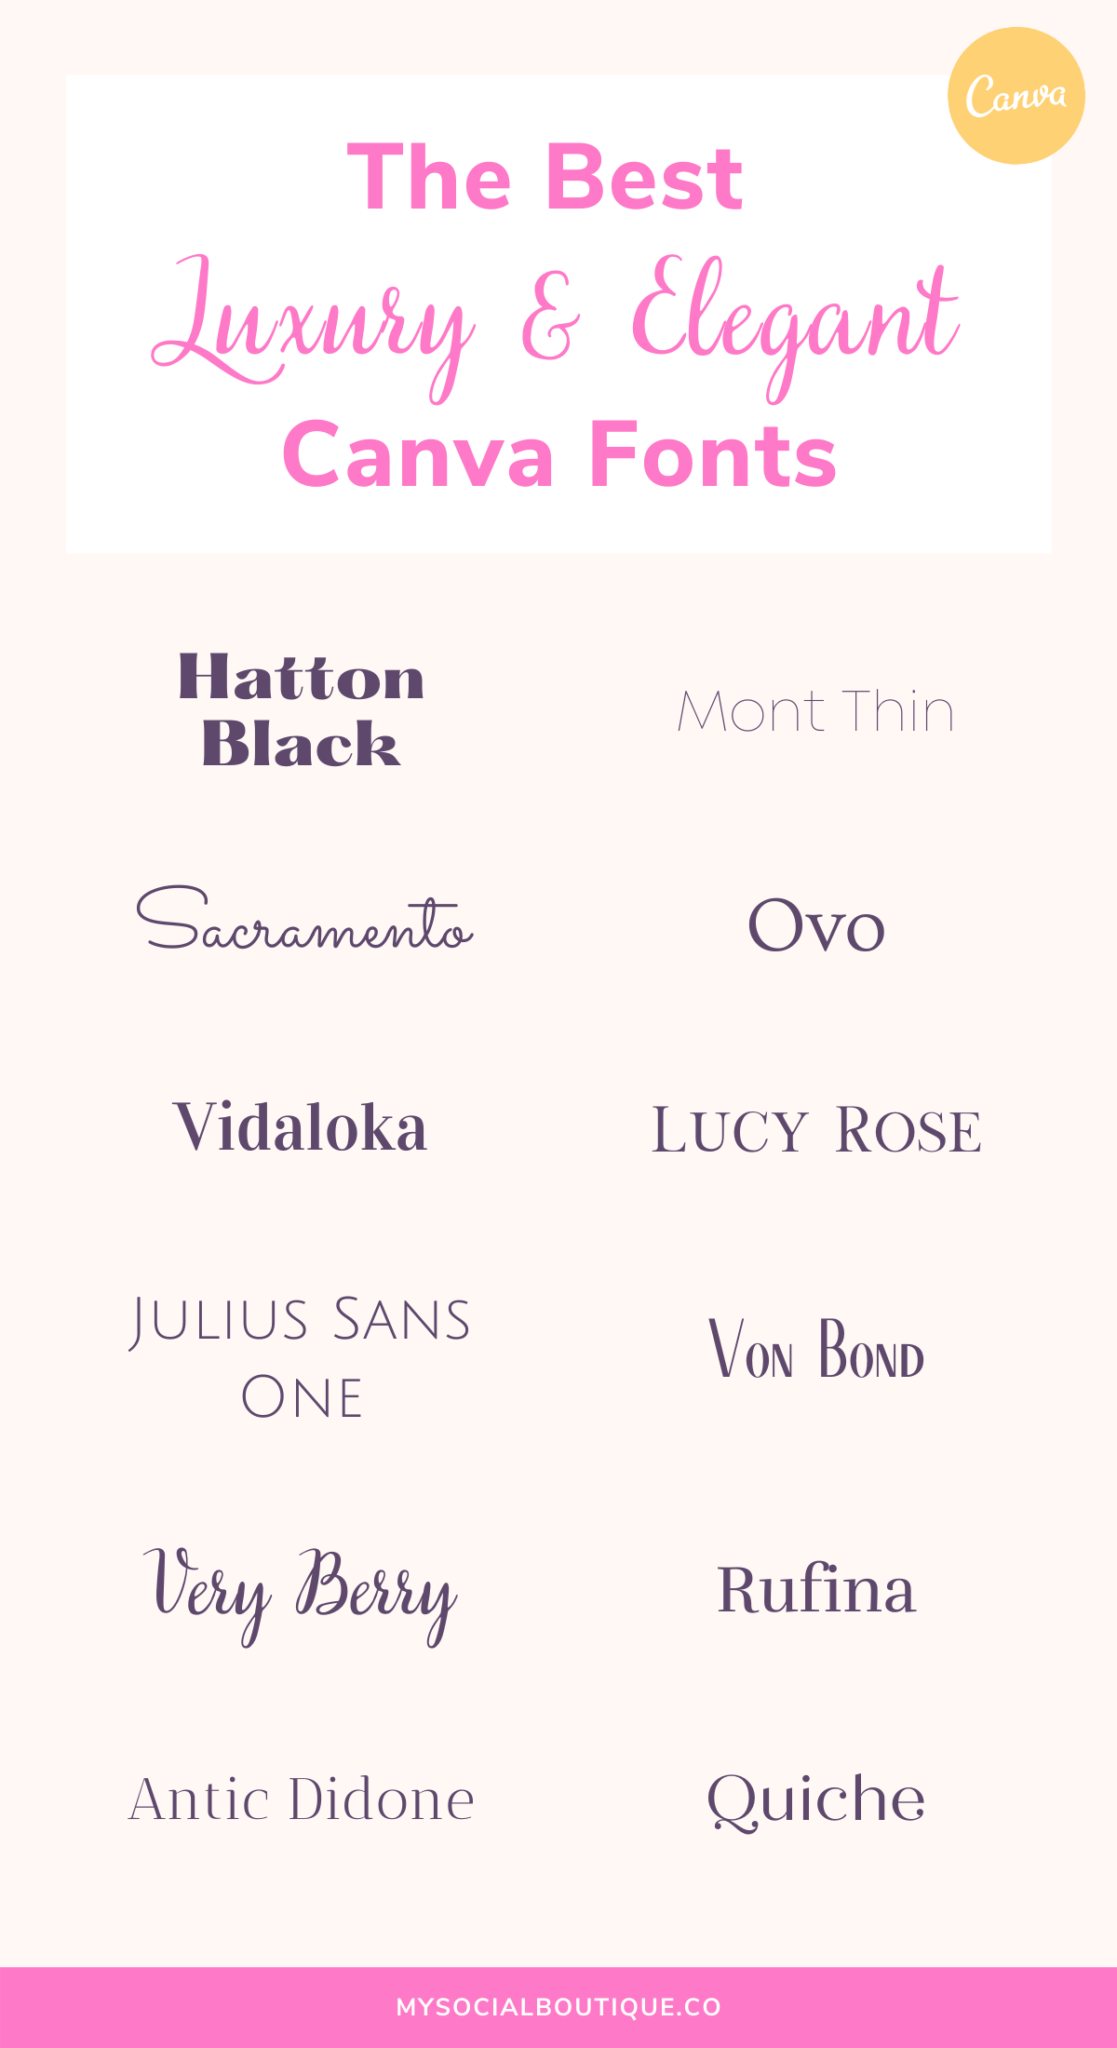 The Ultimate Canva Fonts Guide - My Social Boutique